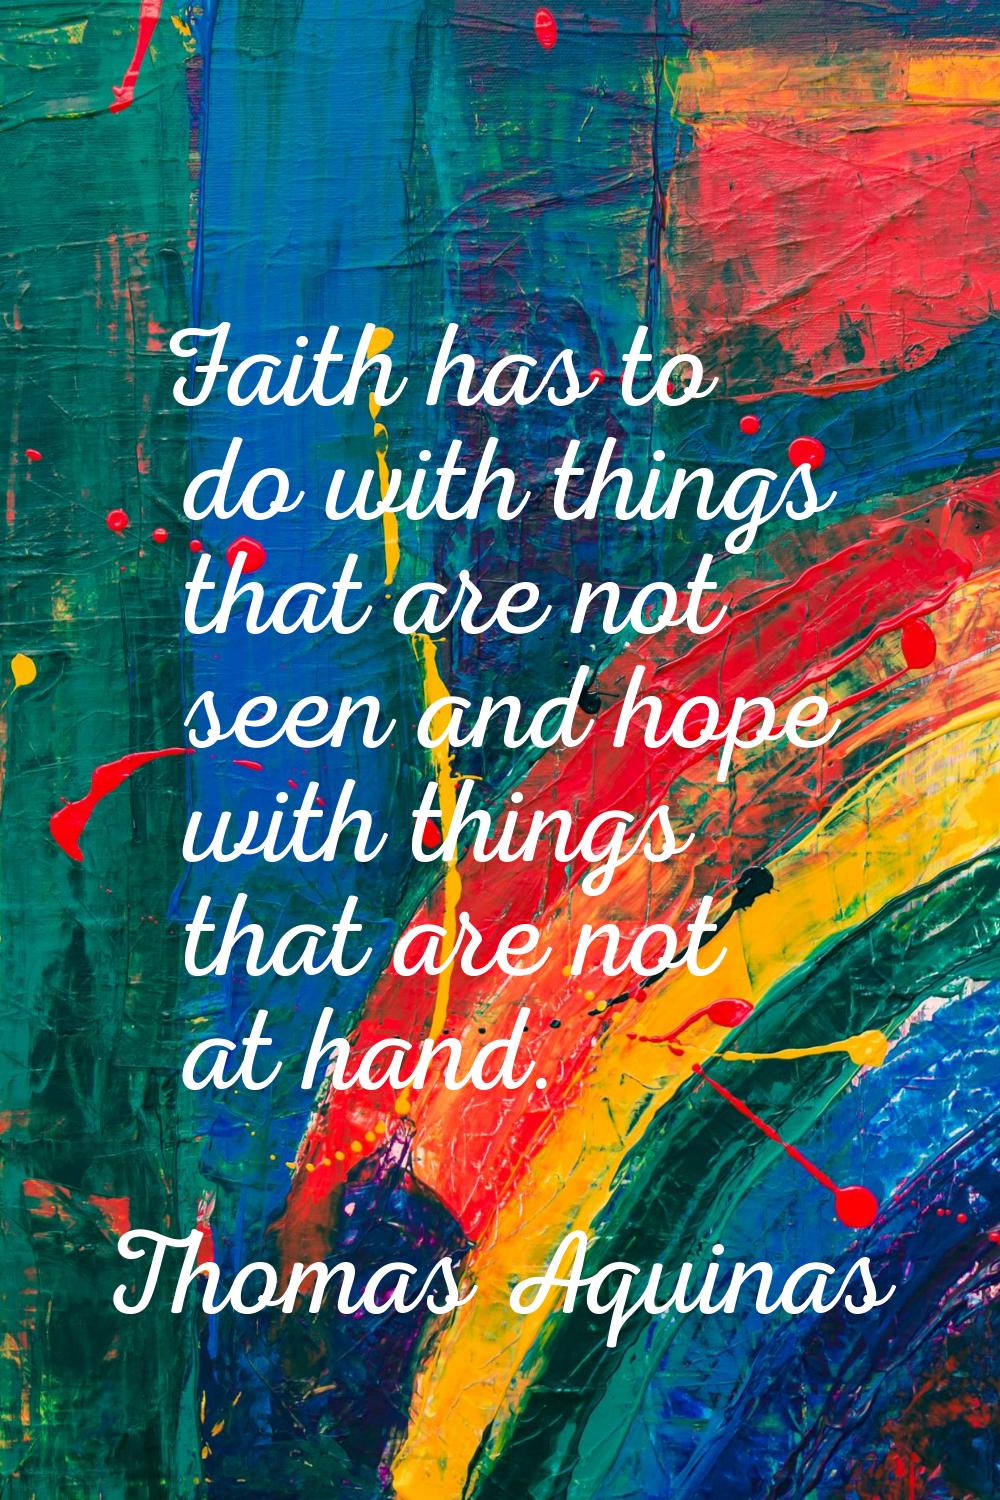 Faith has to do with things that are not seen and hope with things that are not at hand.